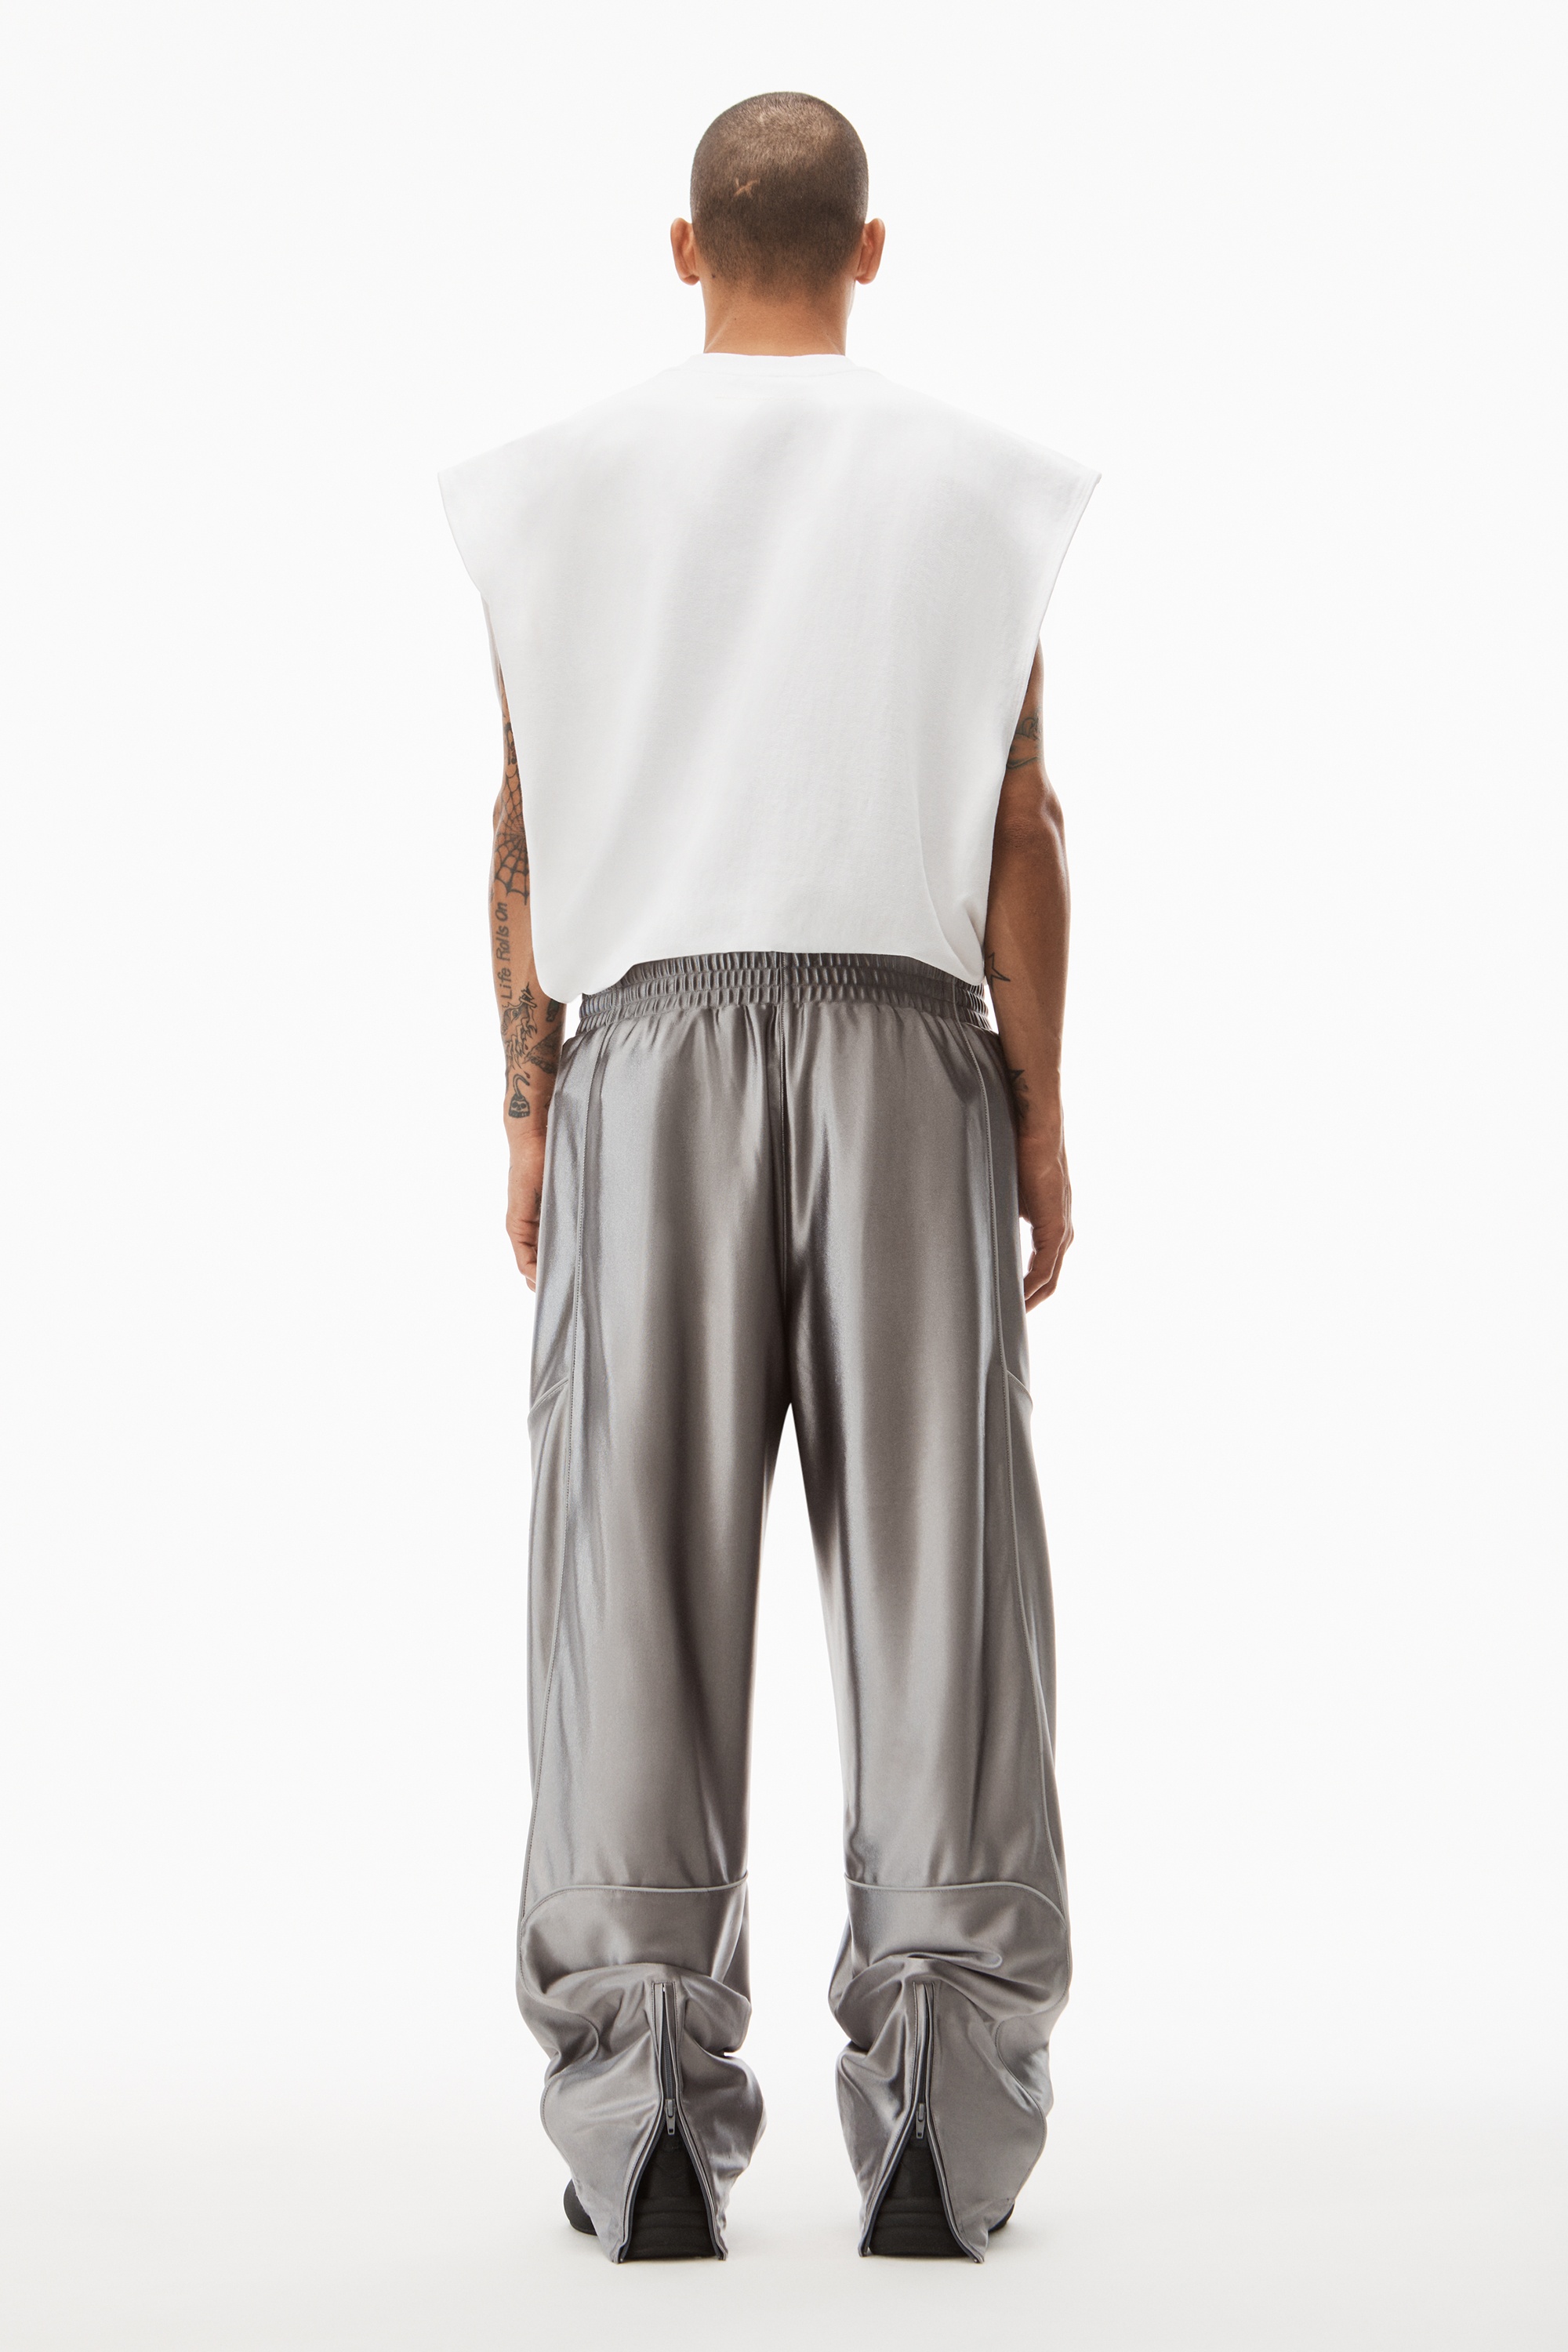 TRACK PANTS IN SATIN FAILLE JERSEY - 5